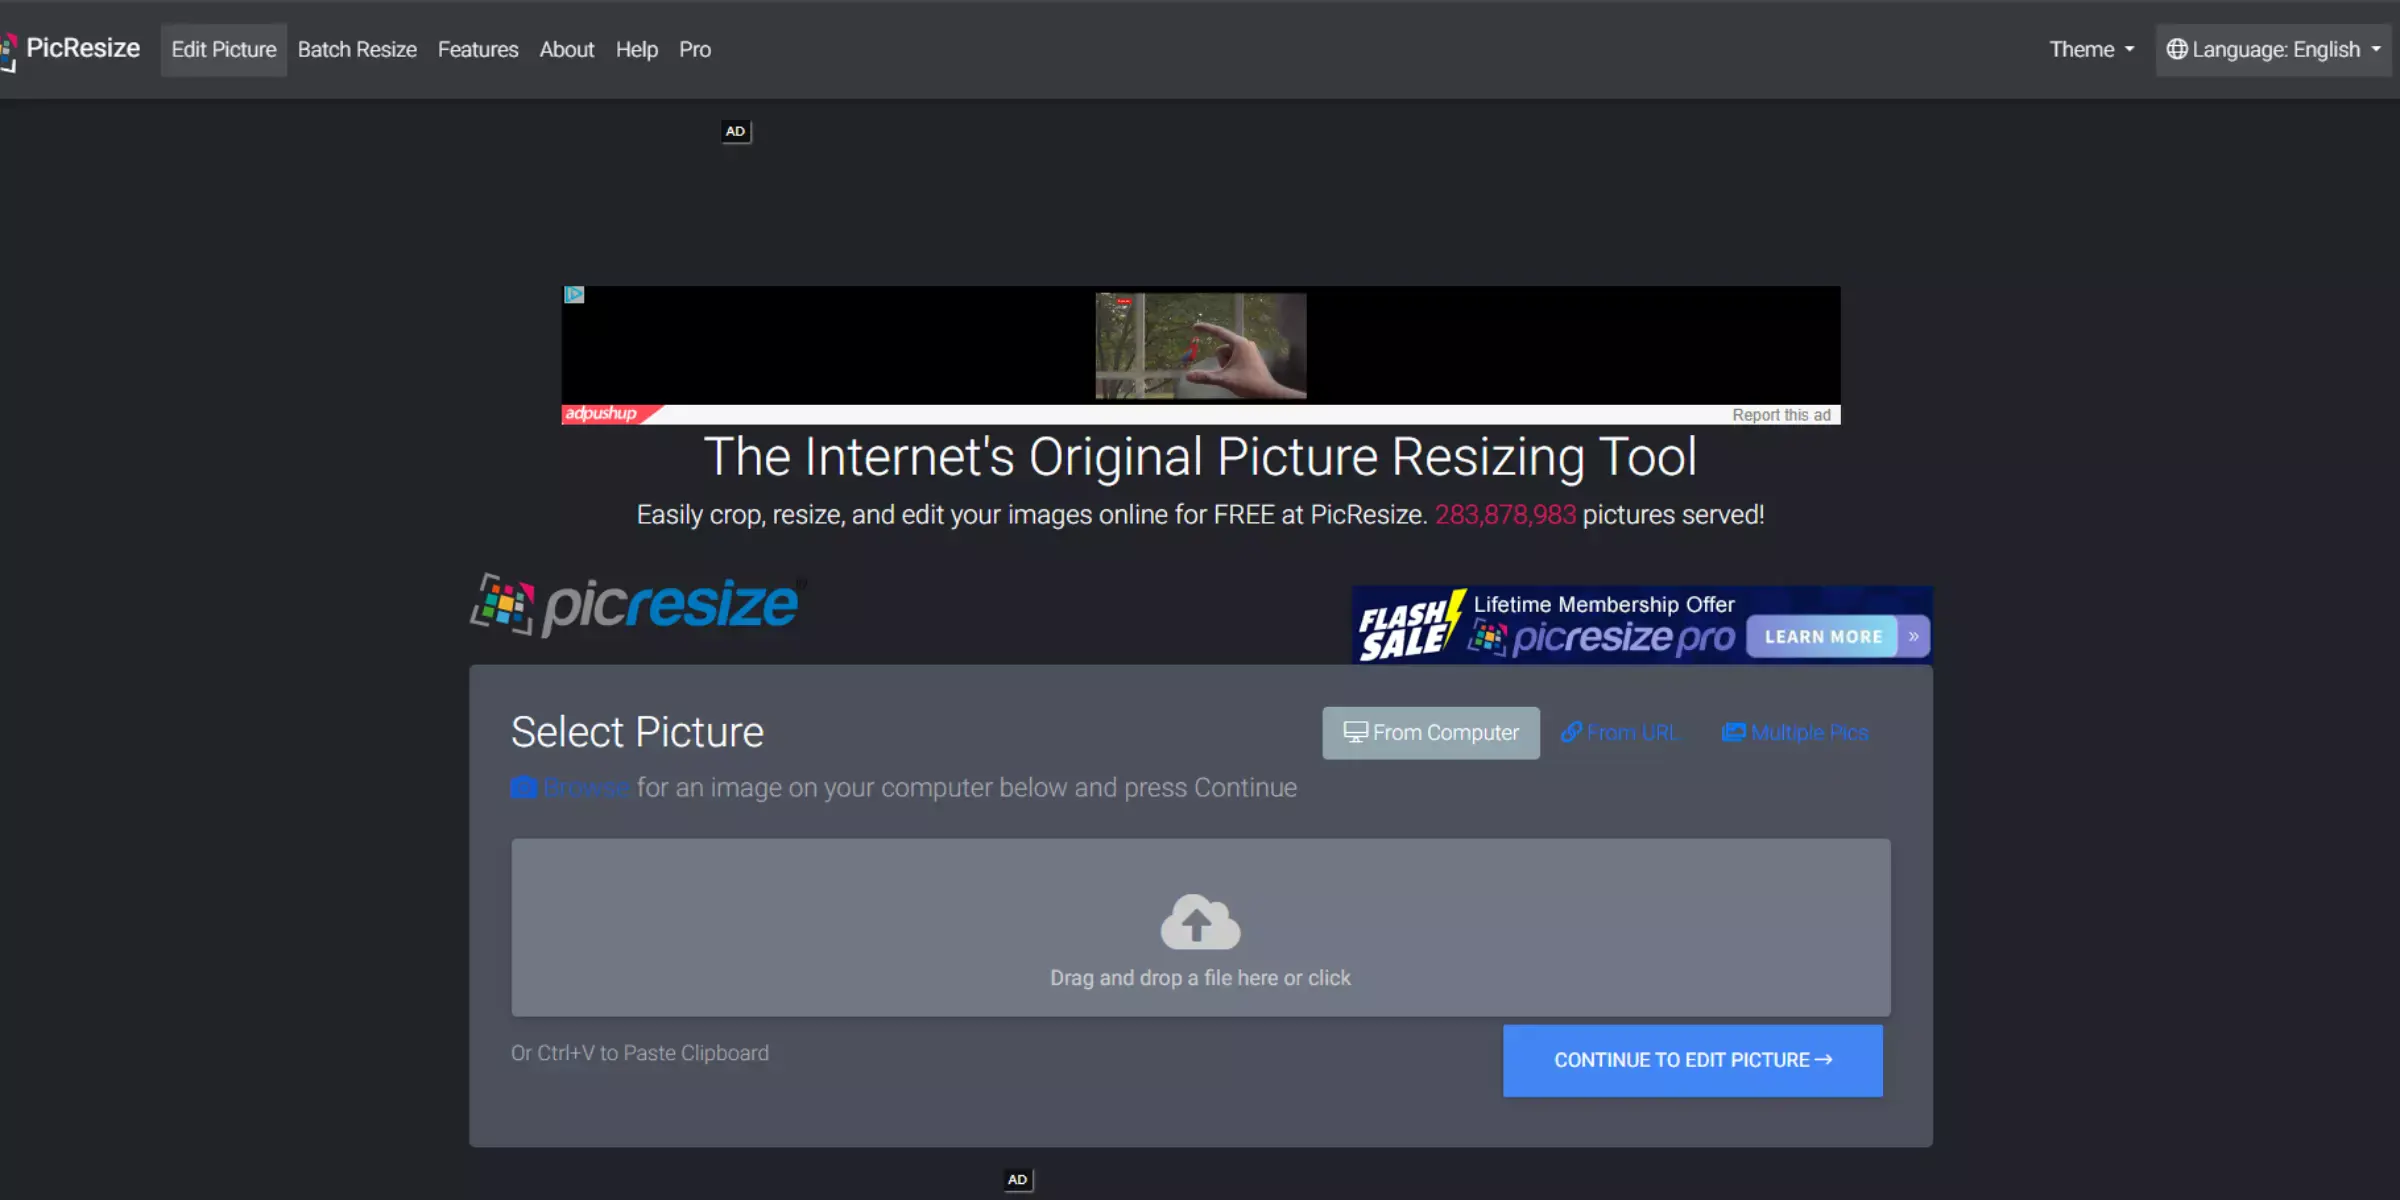 Home page of PicResize